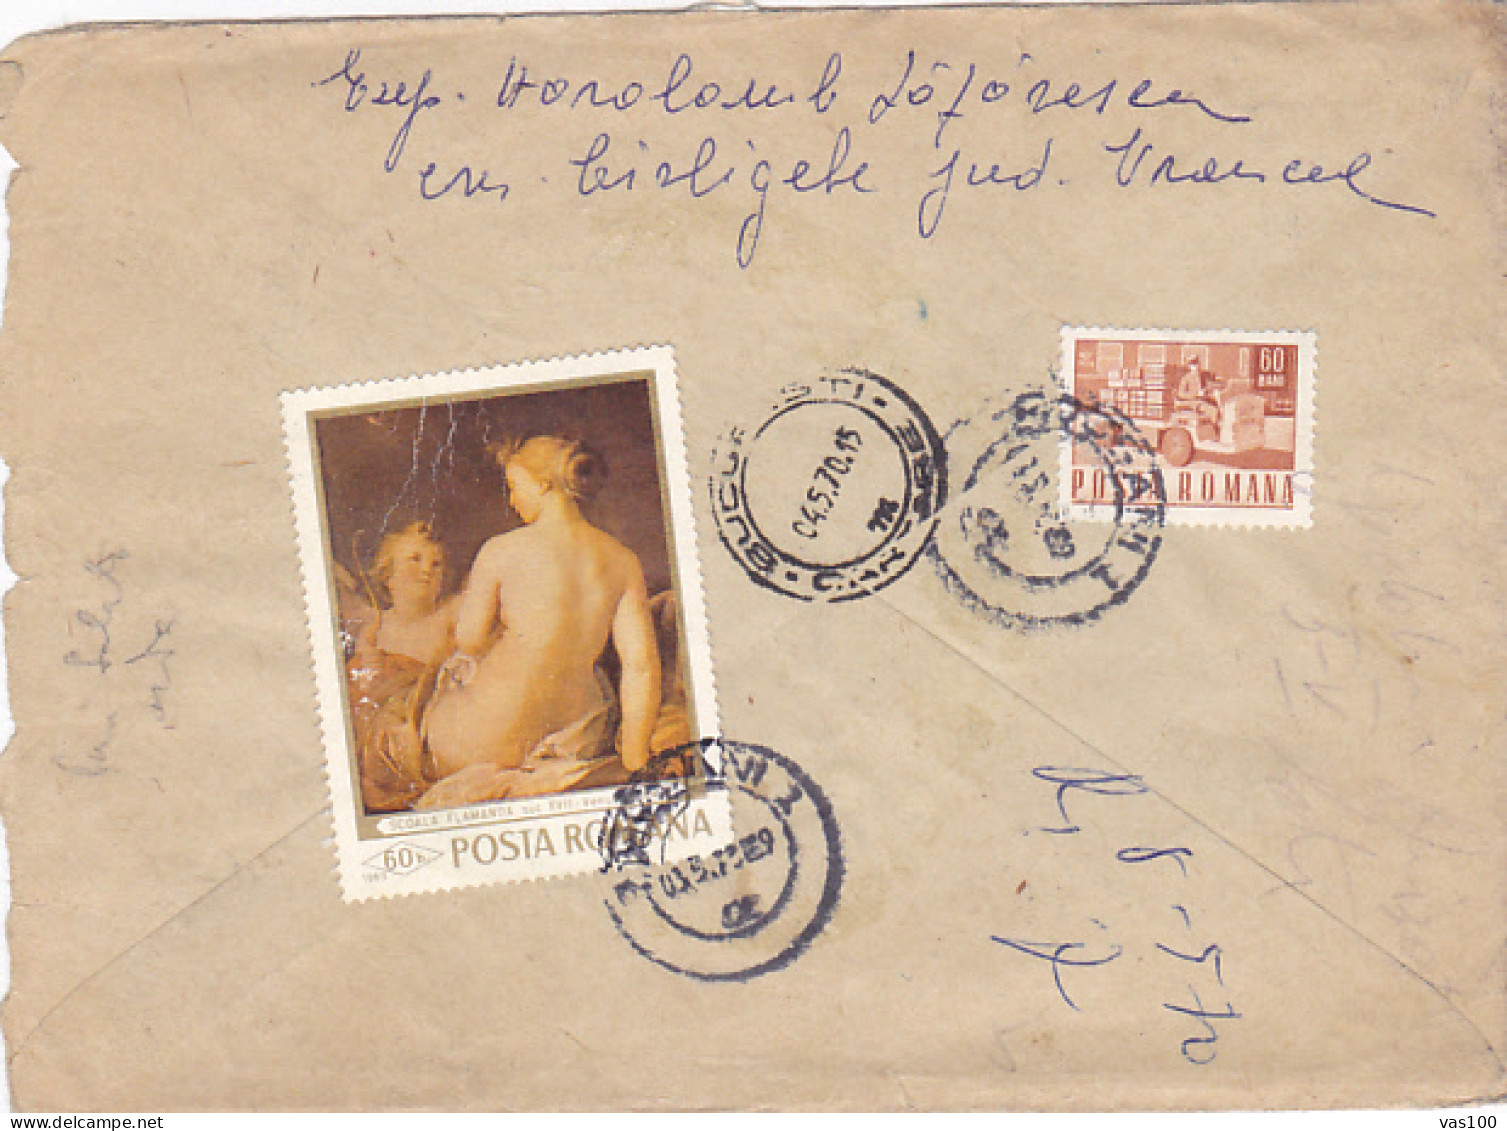 TRAIN, PLANE, POST, NUDE PAINTING, STAMPS ON REGISTERED COVER, 1970, ROMANIA - Lettres & Documents